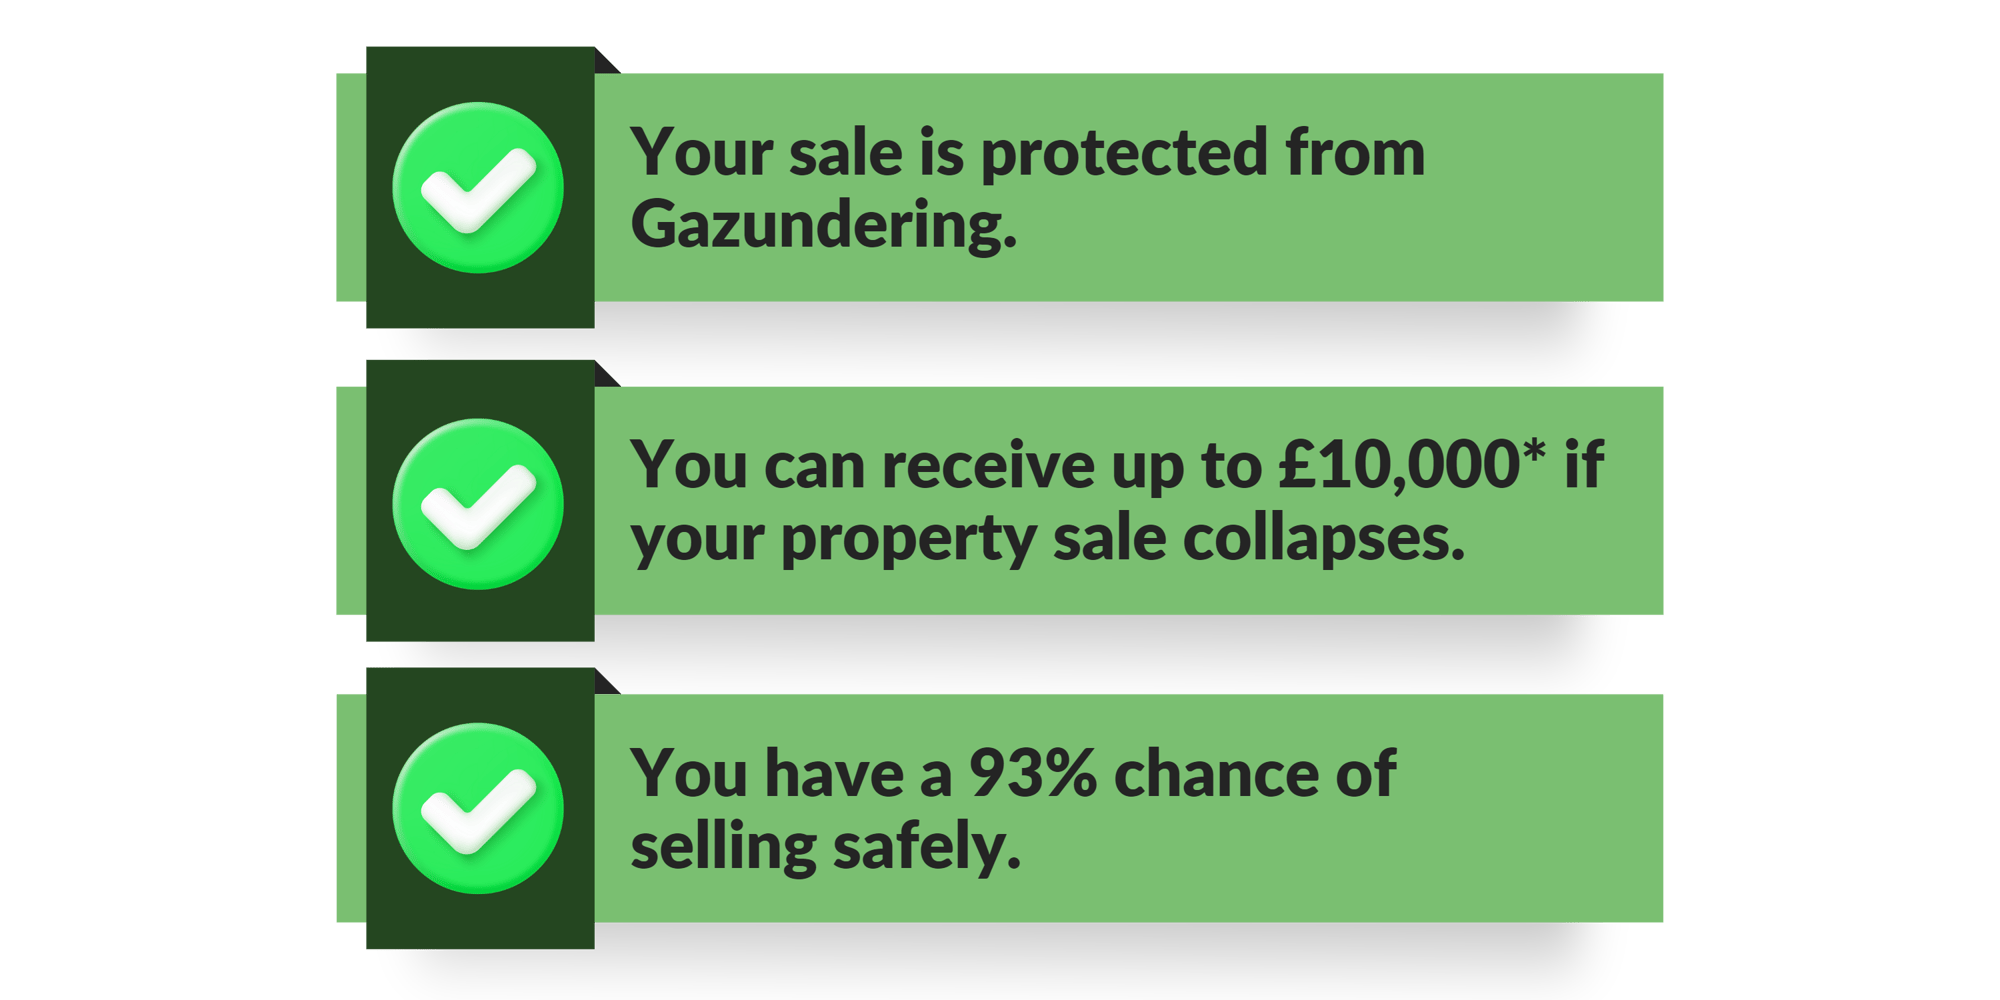 Since 2020 Gazeal has transacted over £2 bn worth of properties, helping over 6,000 home movers and has achieved the lowest fall-through rates in the country.1